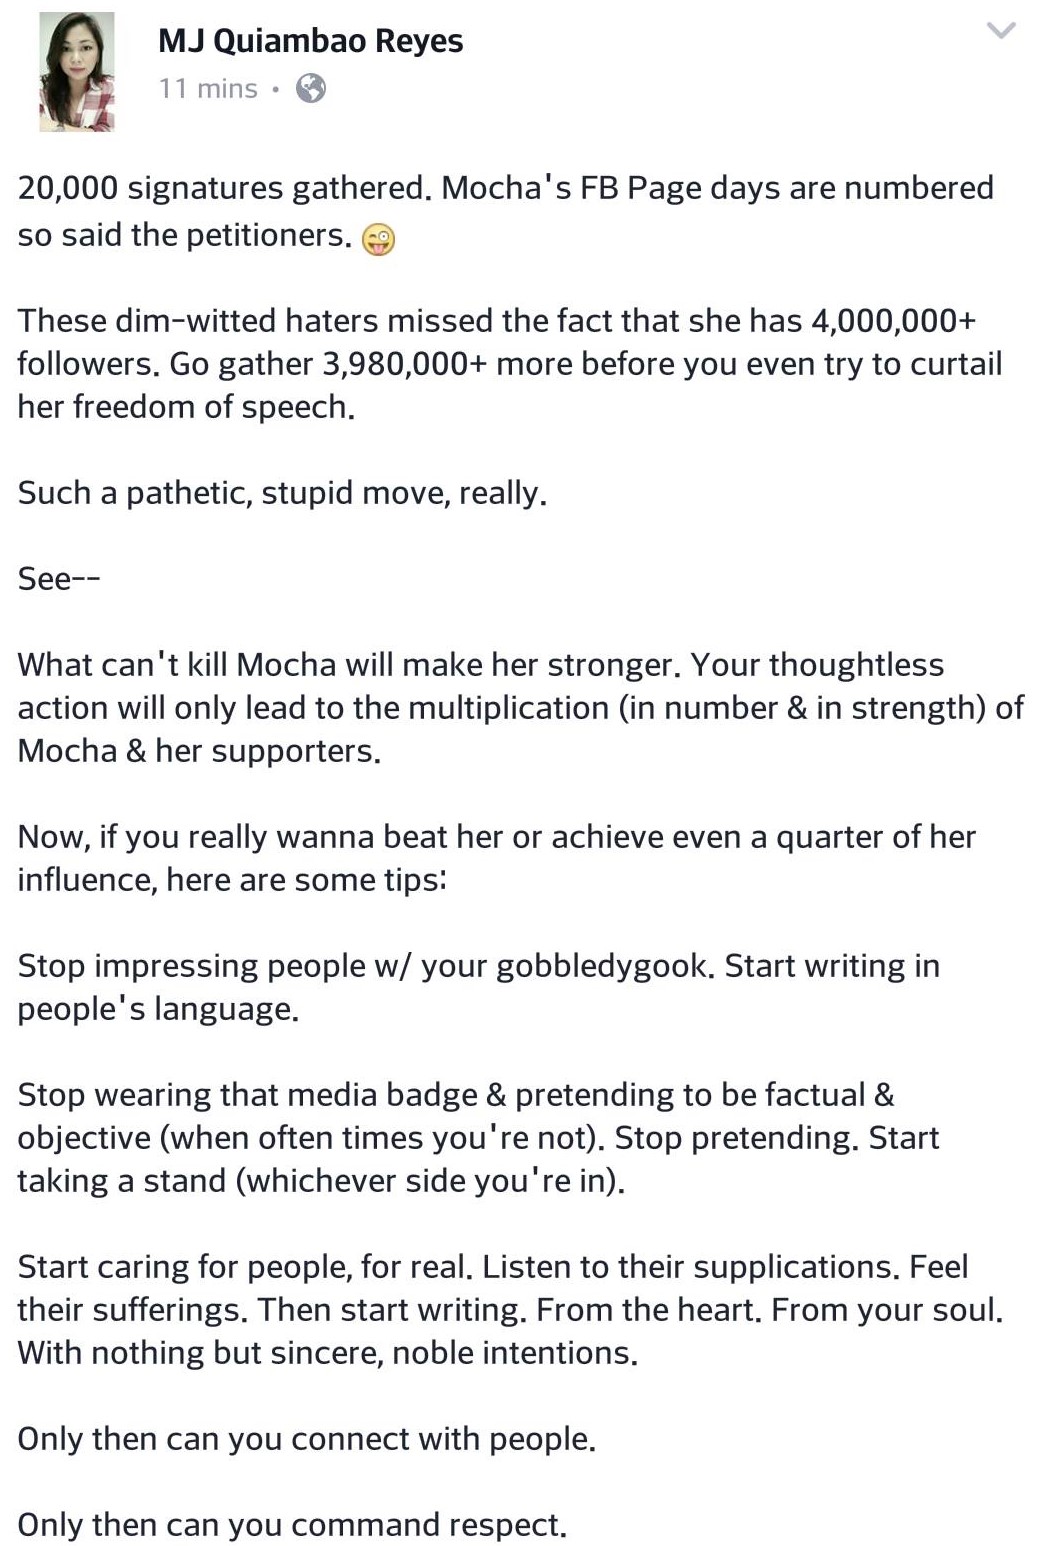 Fearless netizen calls anti-Mocha petition stupid, pathetic: "Your 20,000 signatures are not enough"